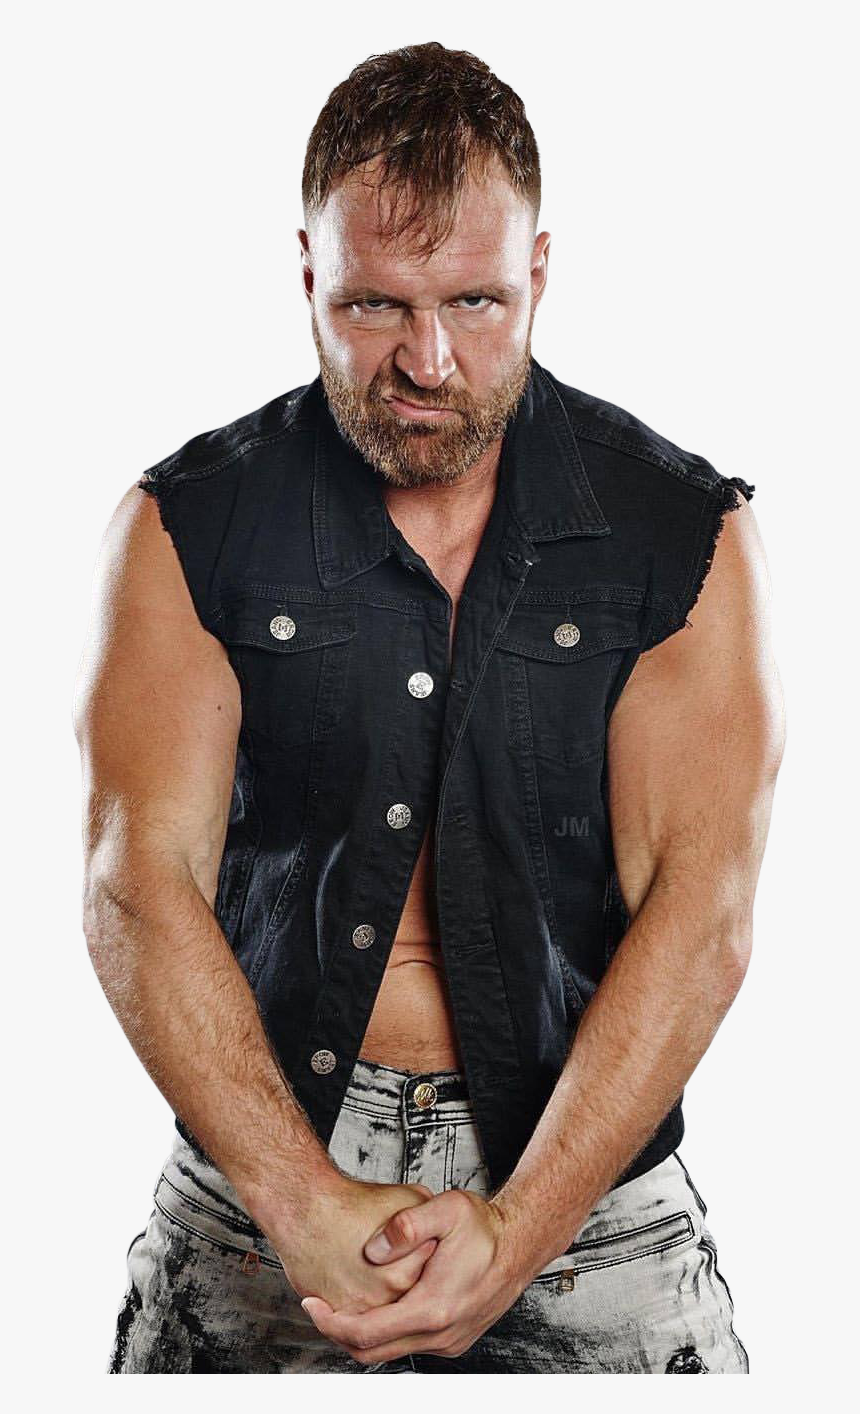 #jonmoxley #moxley #mox #jonathangood #unscriptedmoxviolence - Jon Moxley Aew Png, Transparent Png, Free Download